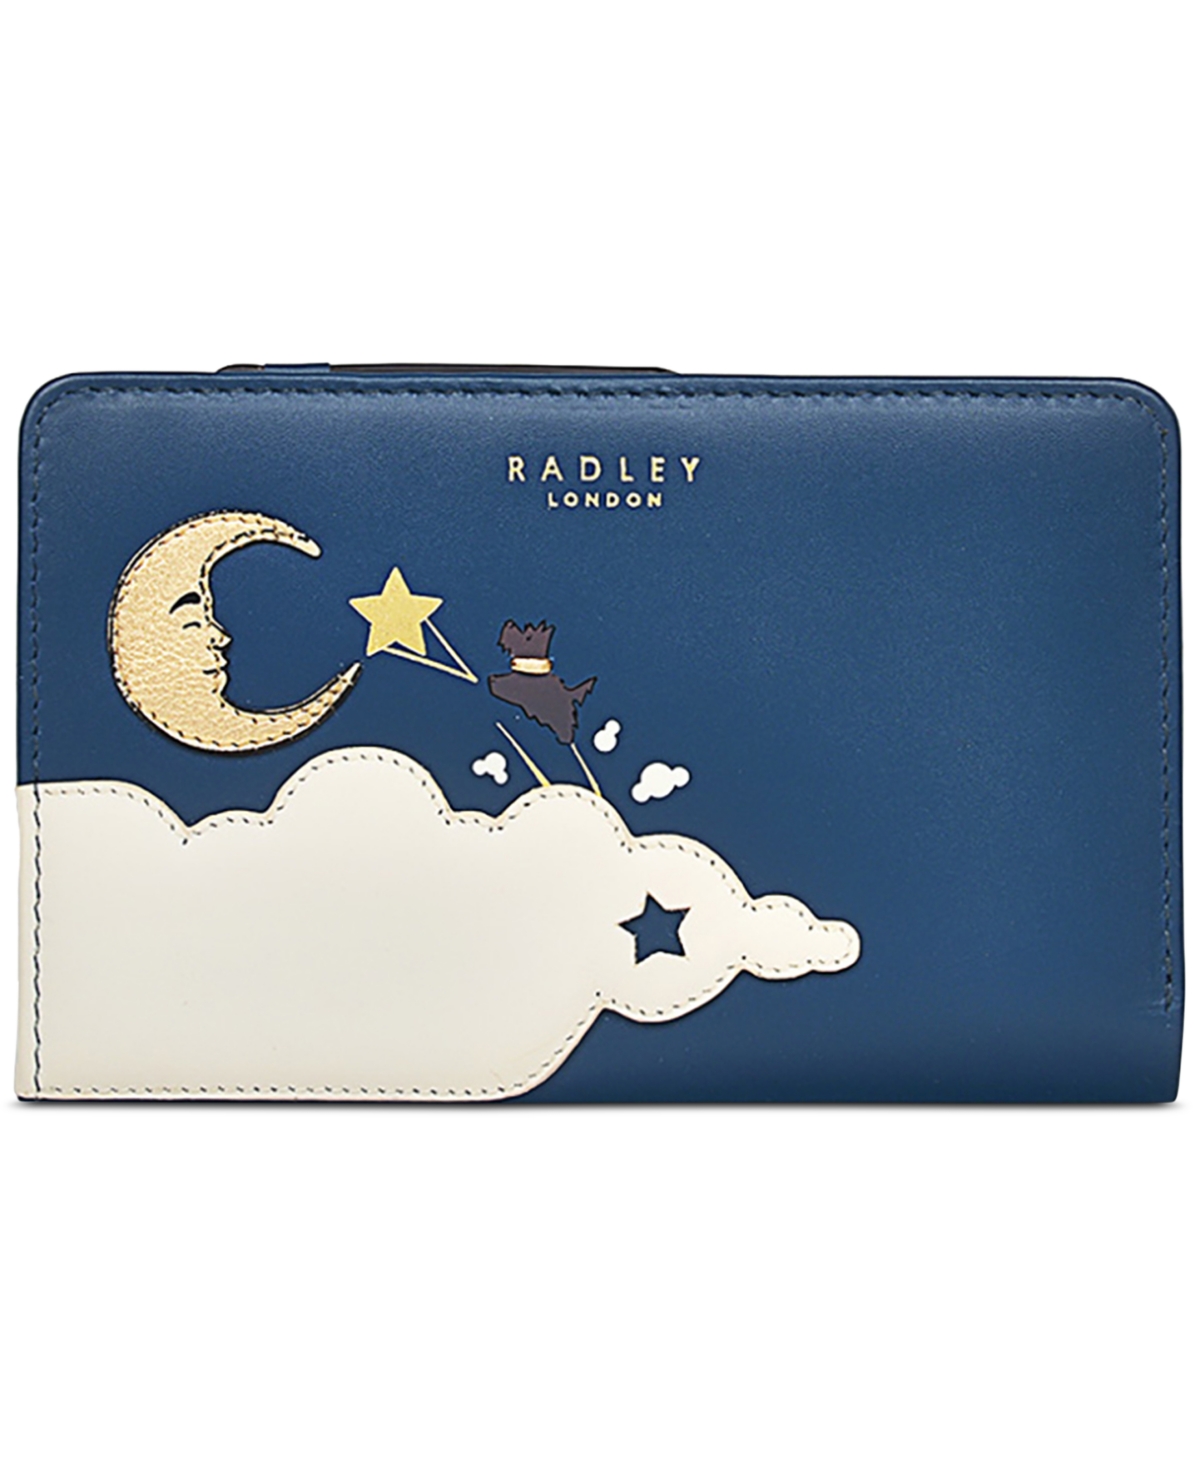 Shoot For The Moon Medium Leather Bifold Wallet - Dark Teal